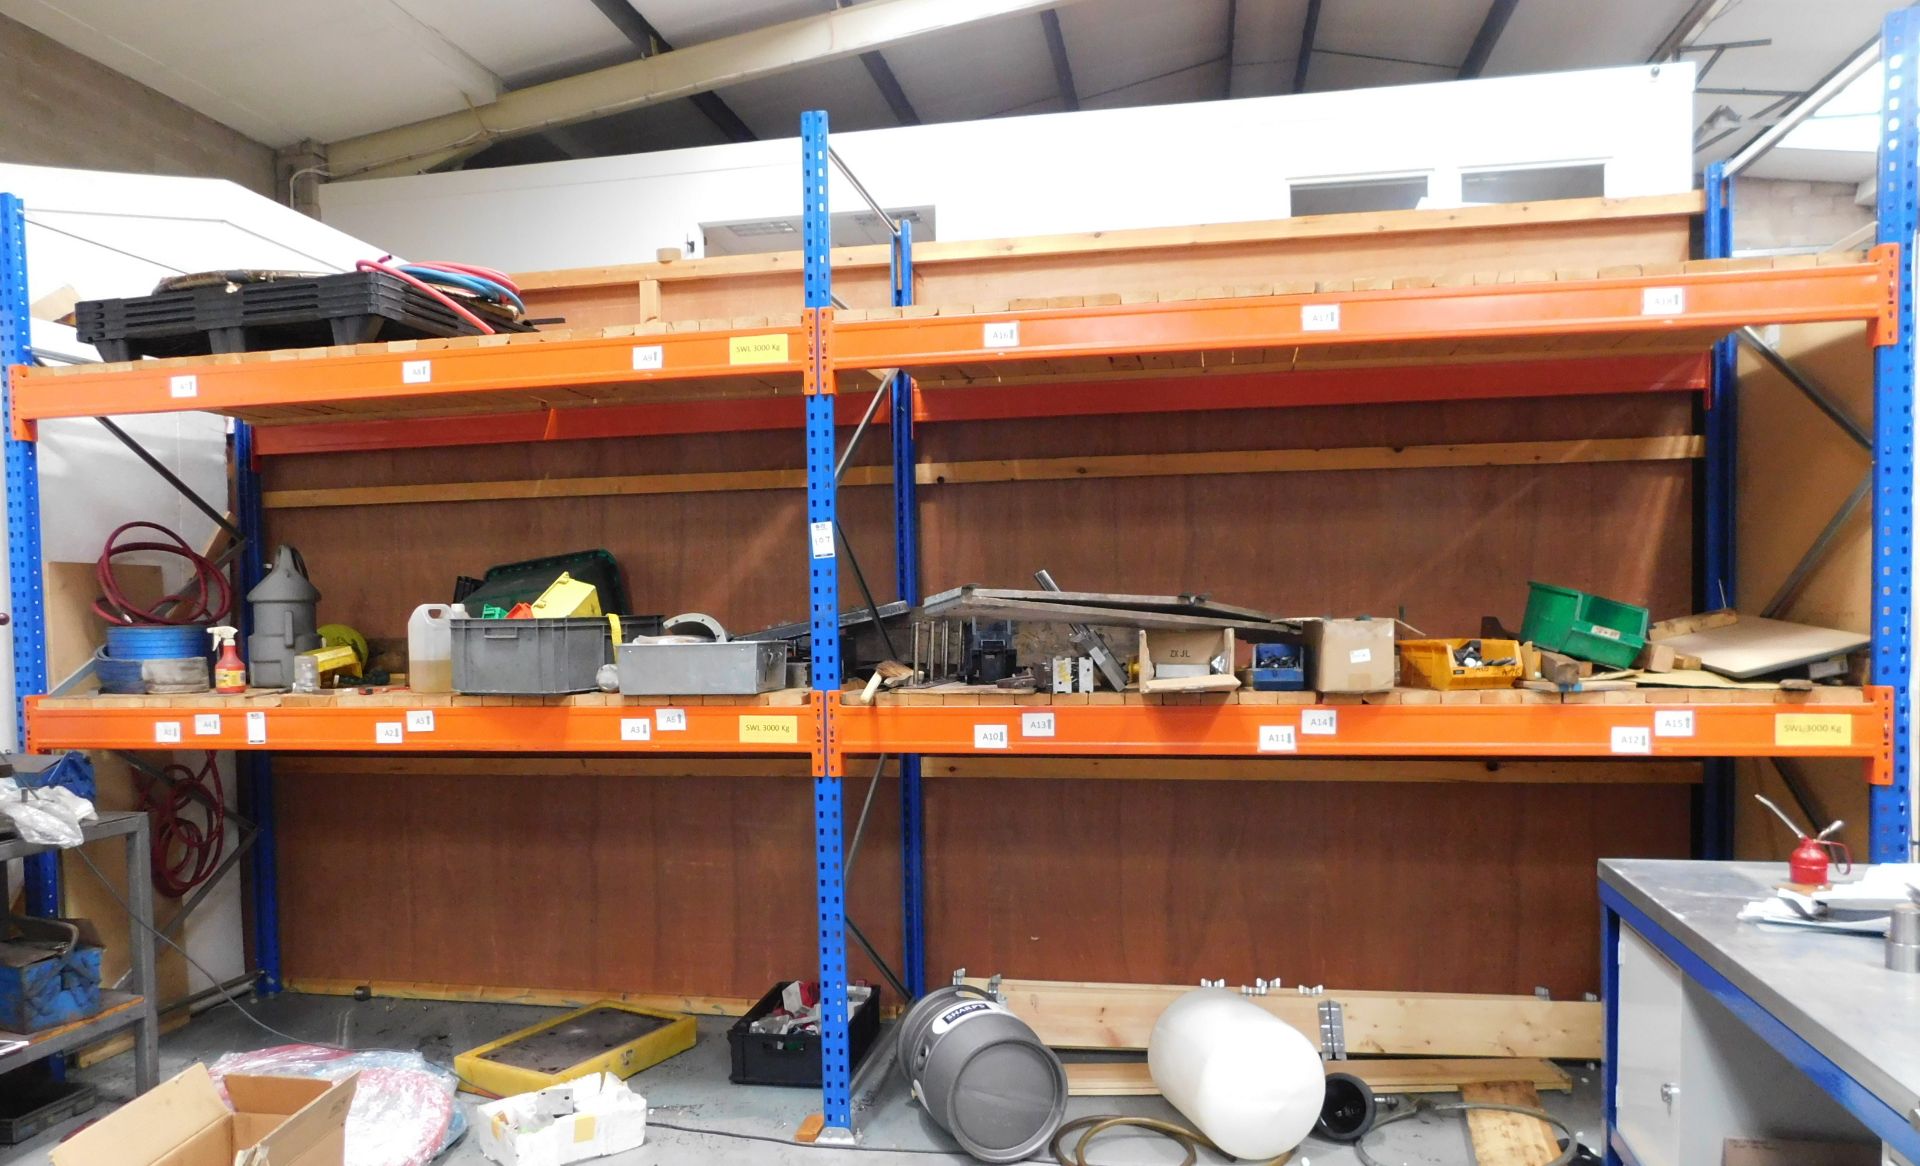 2 Bays of Boltless Pallet Racking & Contents (Excluding 3rd Party Tooling)  (Located North